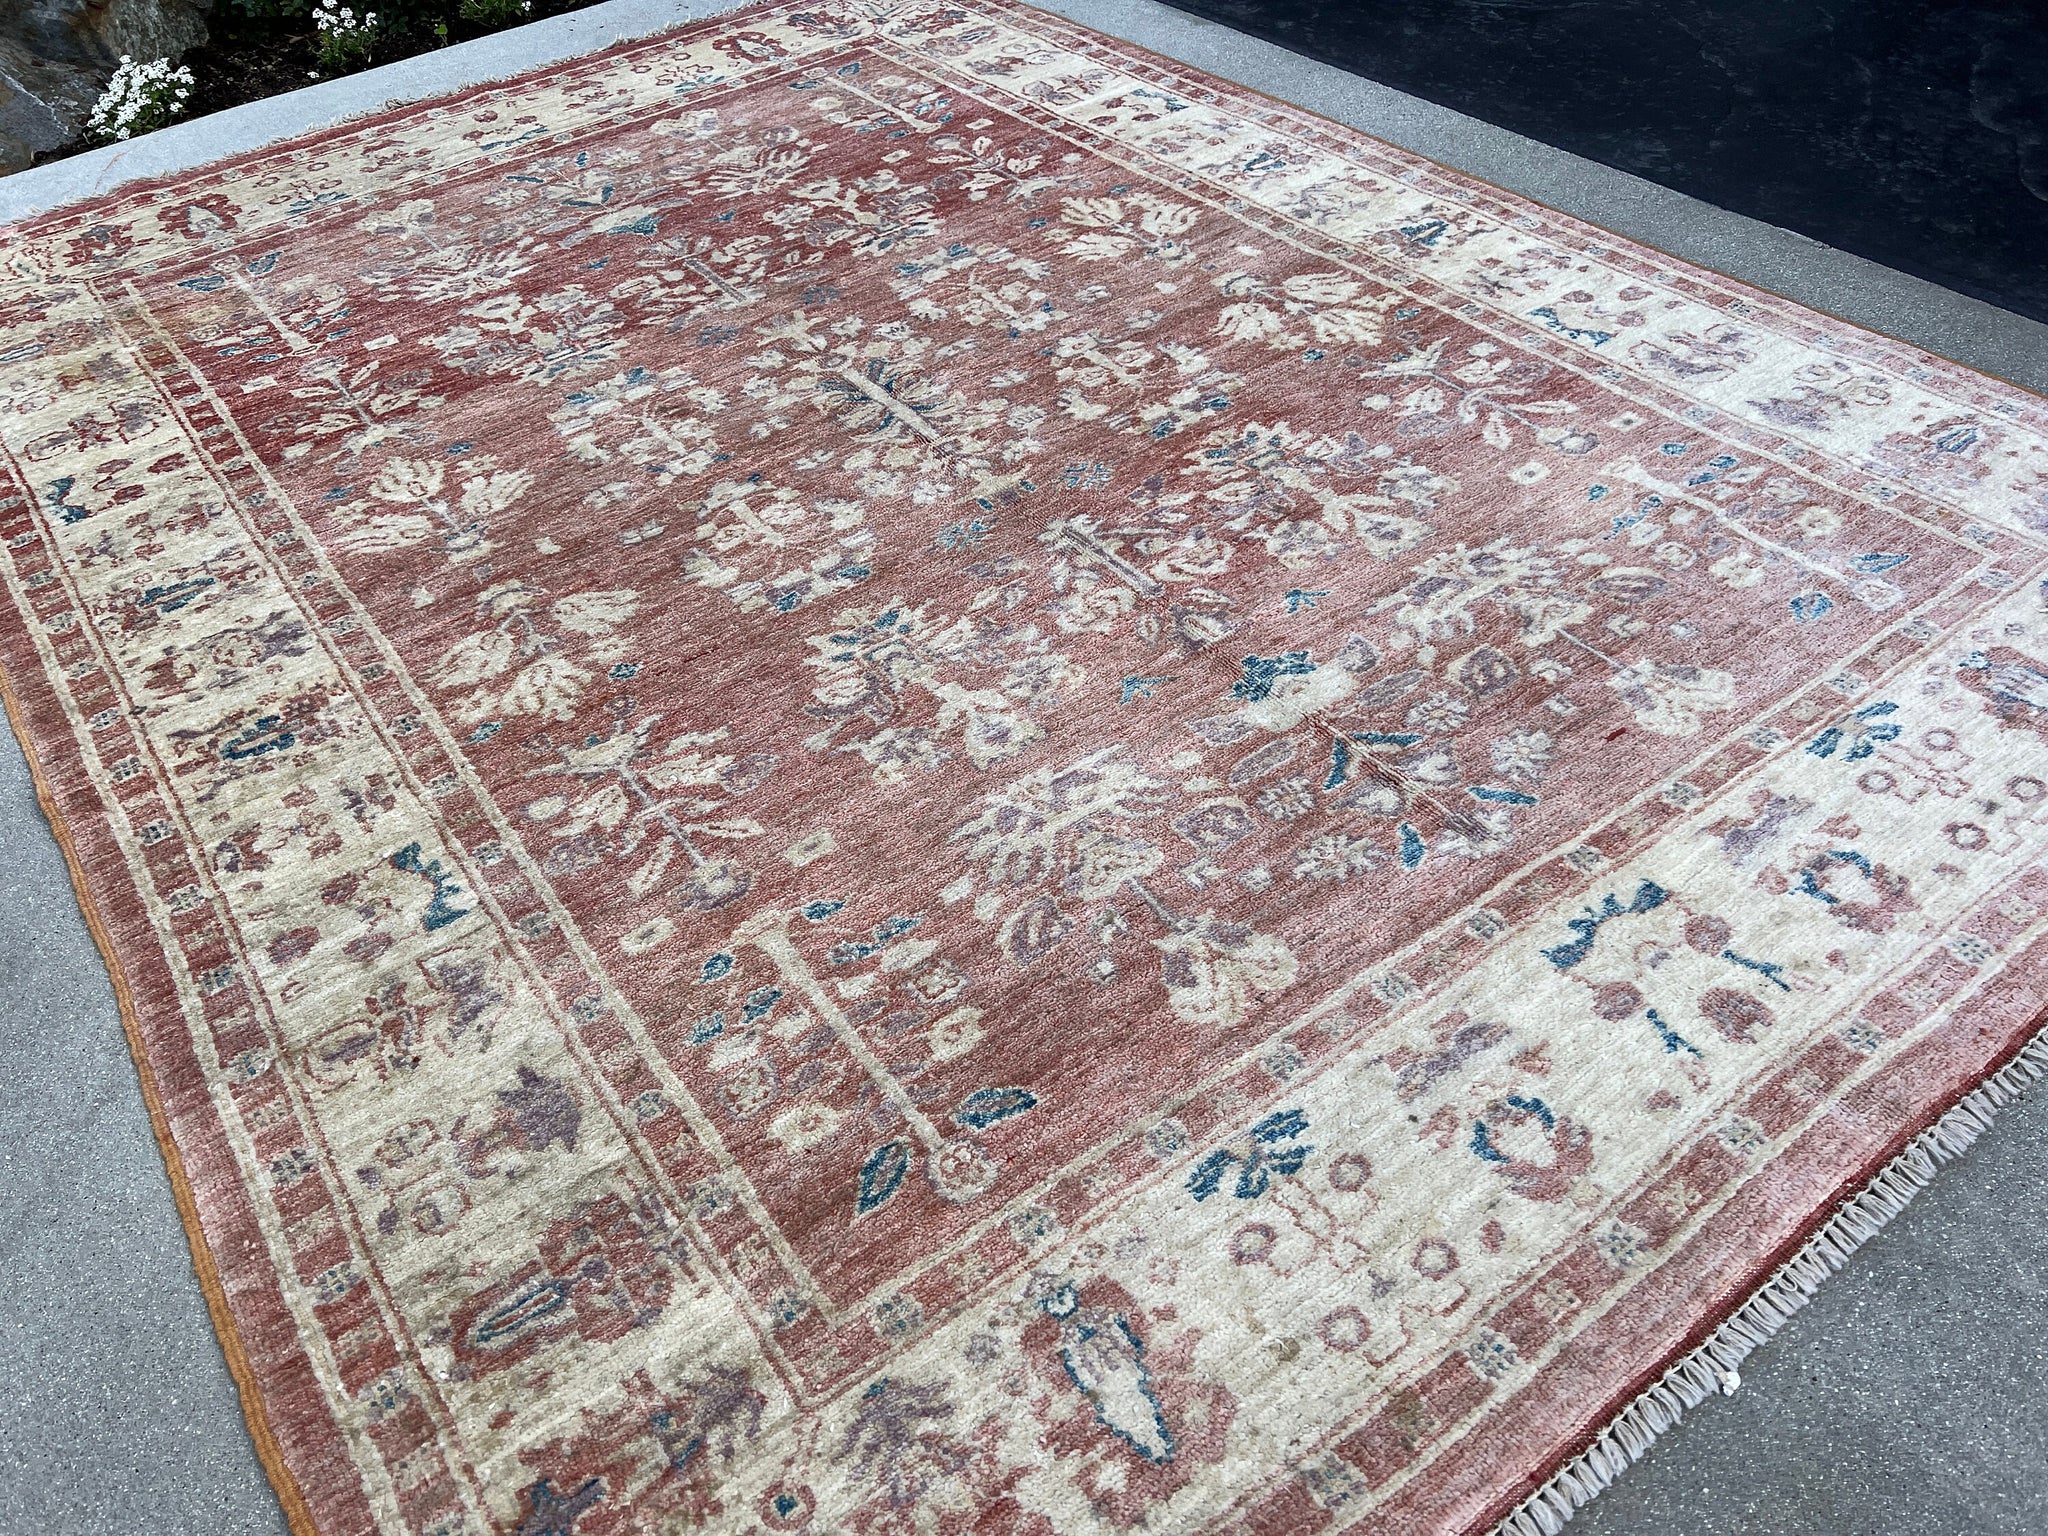 6x8 (180x245) Vintage Handmade Afghan Rug | Muted Coral Salmon Pink Cream Beige Teal Tan Caramel | Hand Knotted Oriental Floral Wool Persian